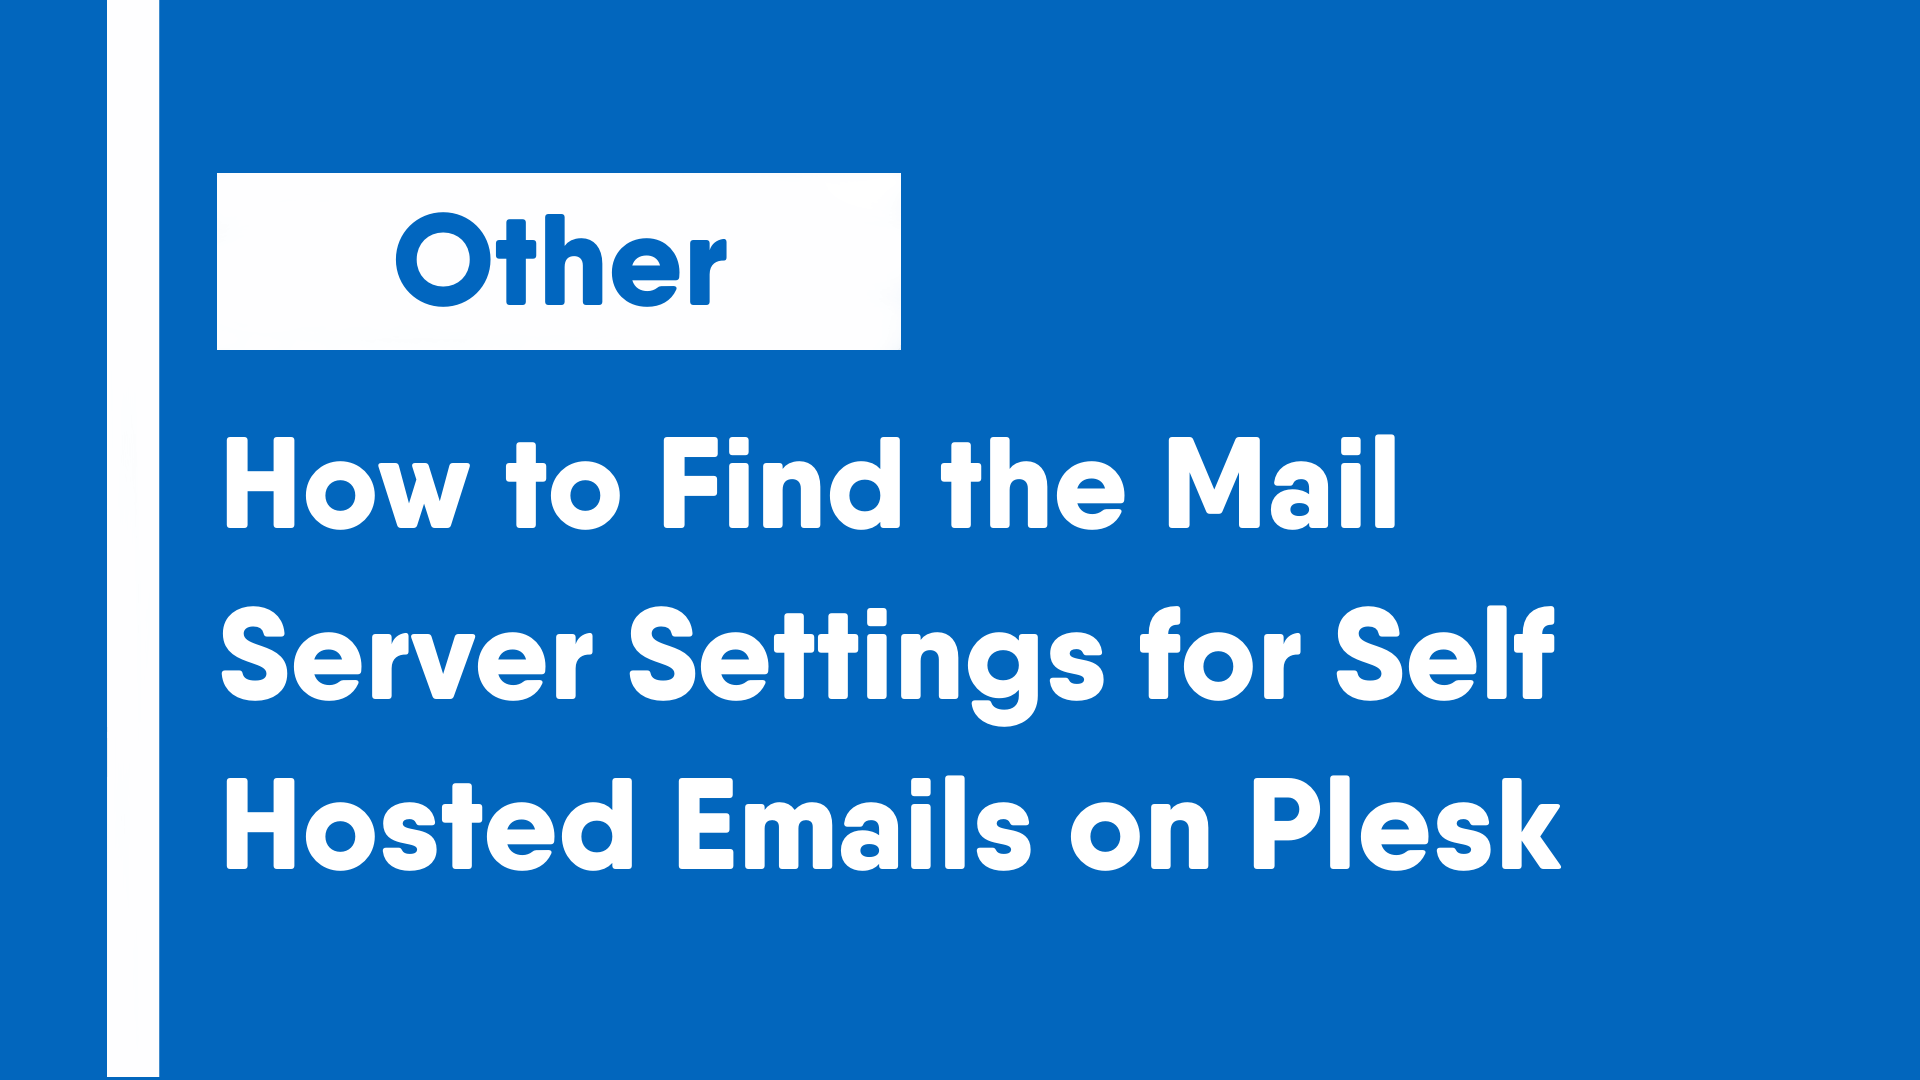 How to Find the Mail Server Settings for Self Hosted Emails on Plesk